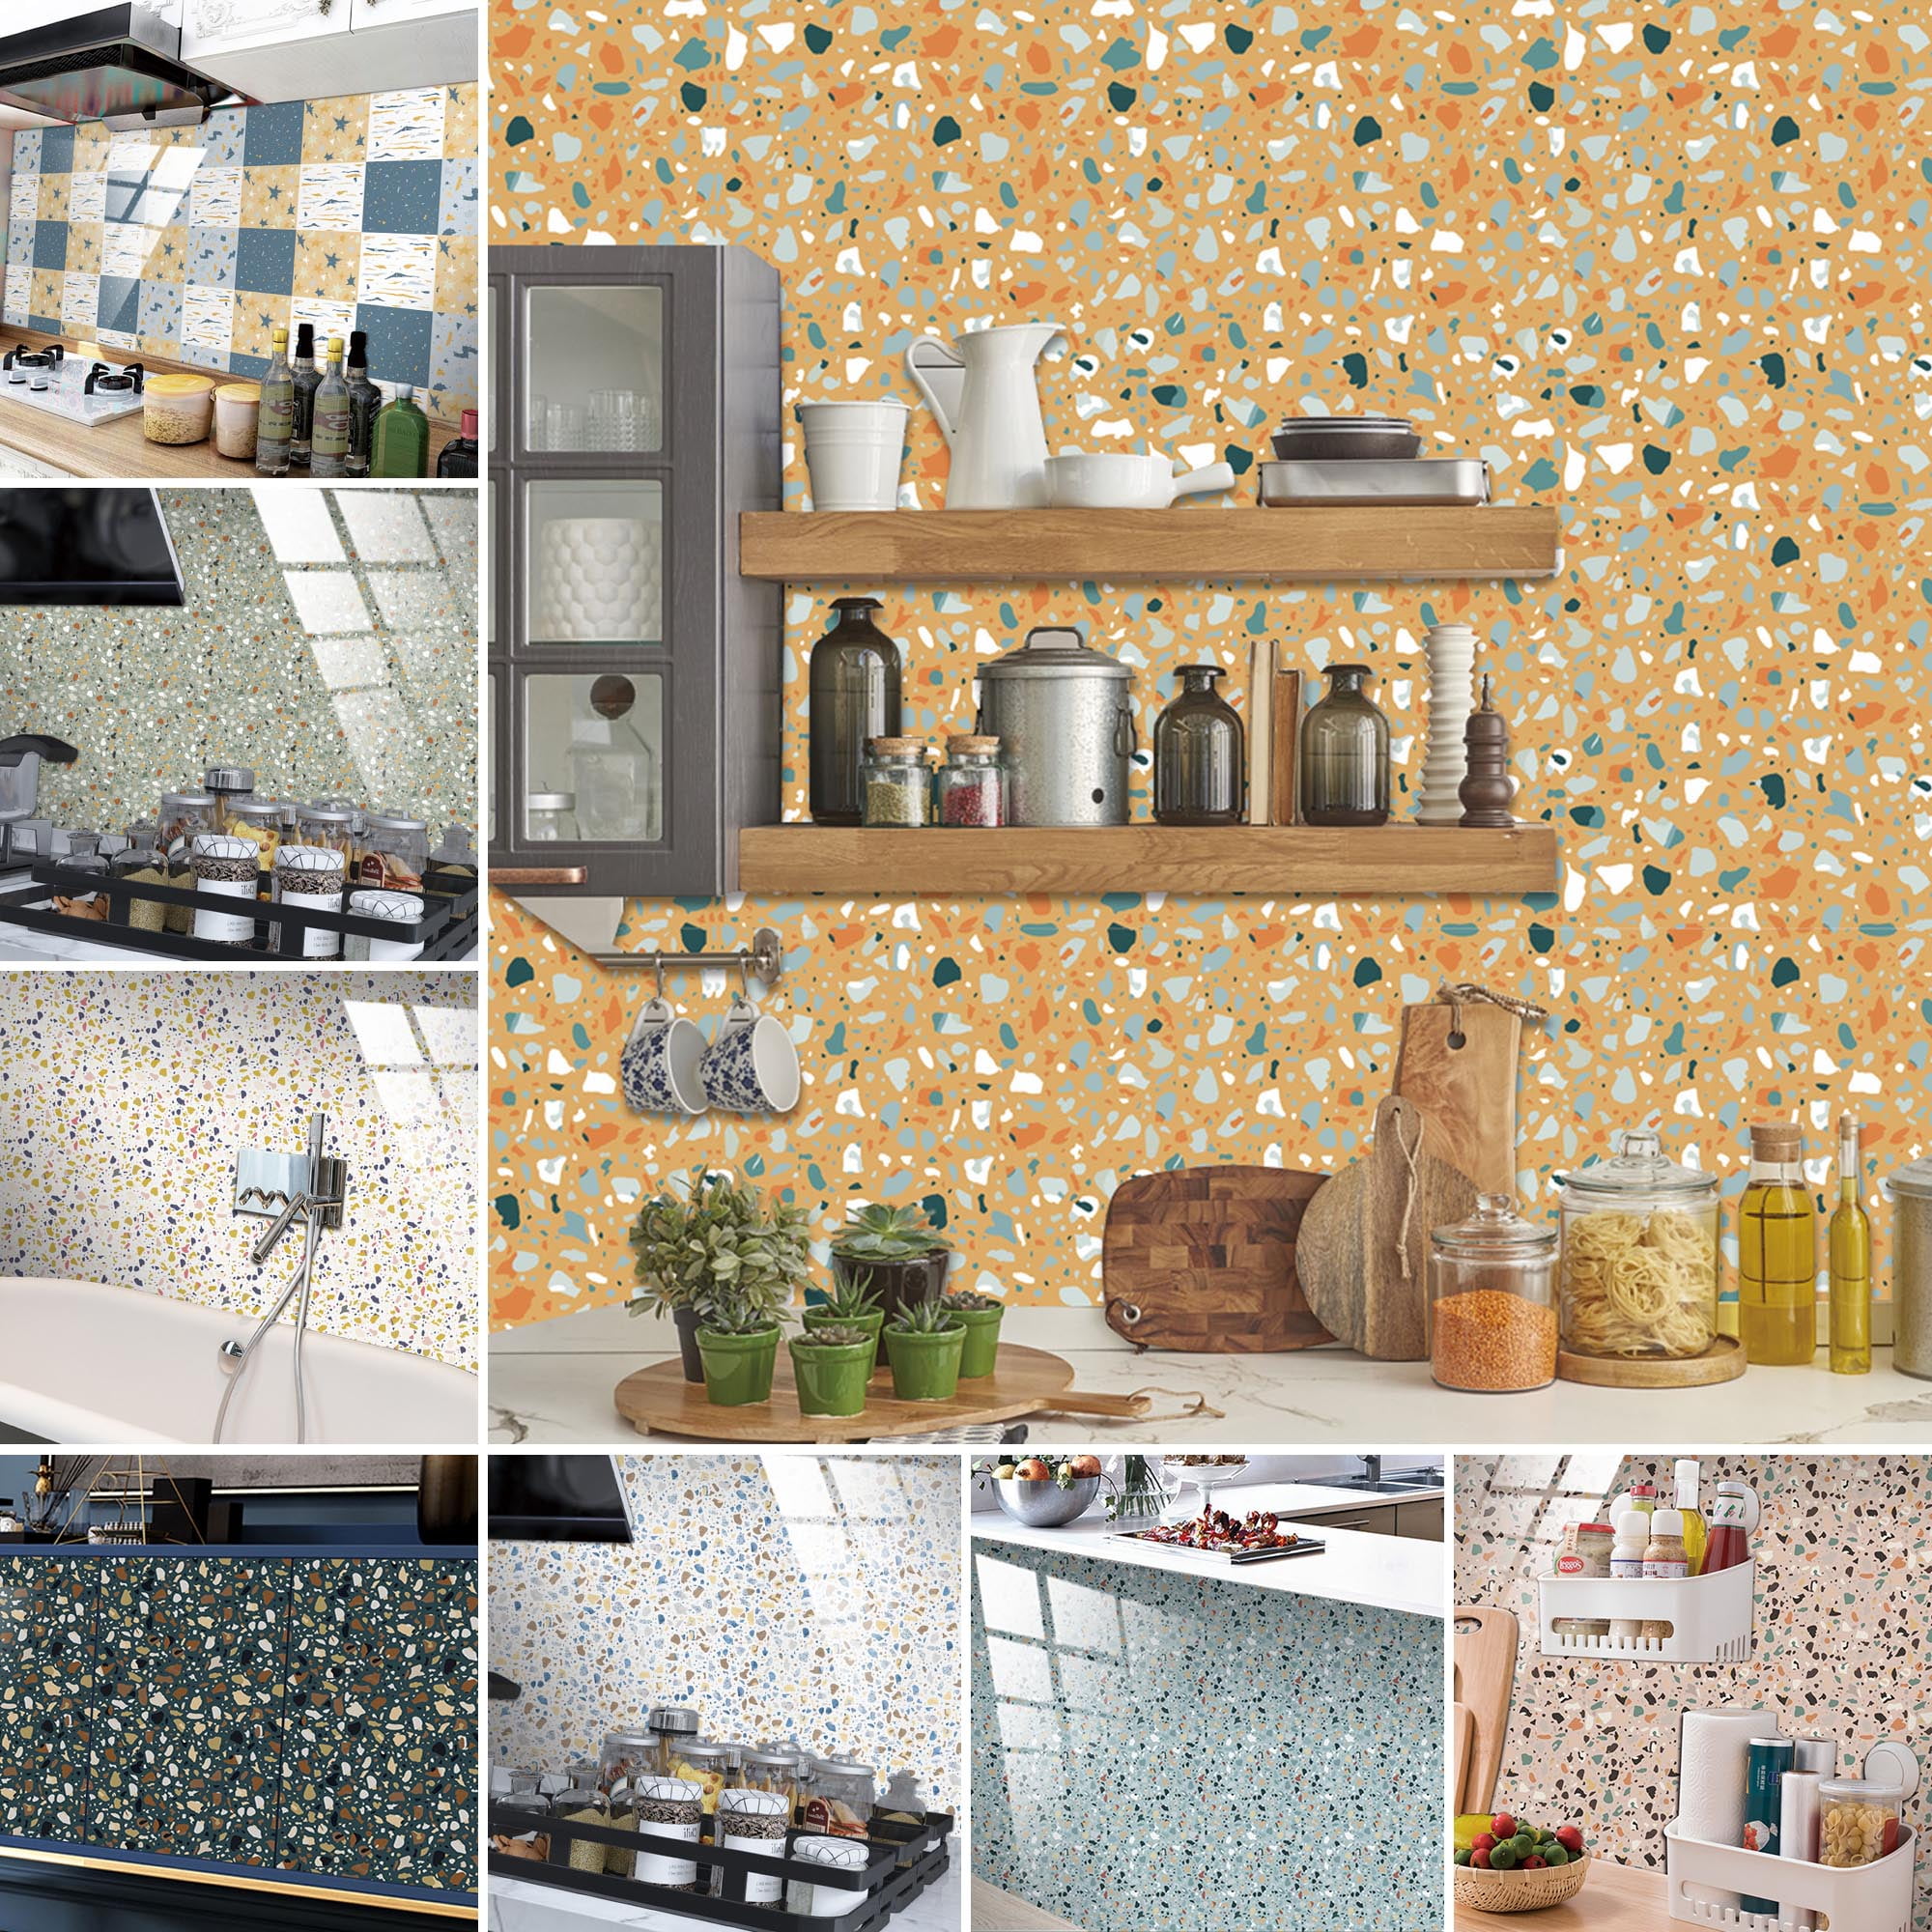 3D Mosaic Sticker Kitchen Tile Stickers Bathroom Self-adhesive Wall Home Decor